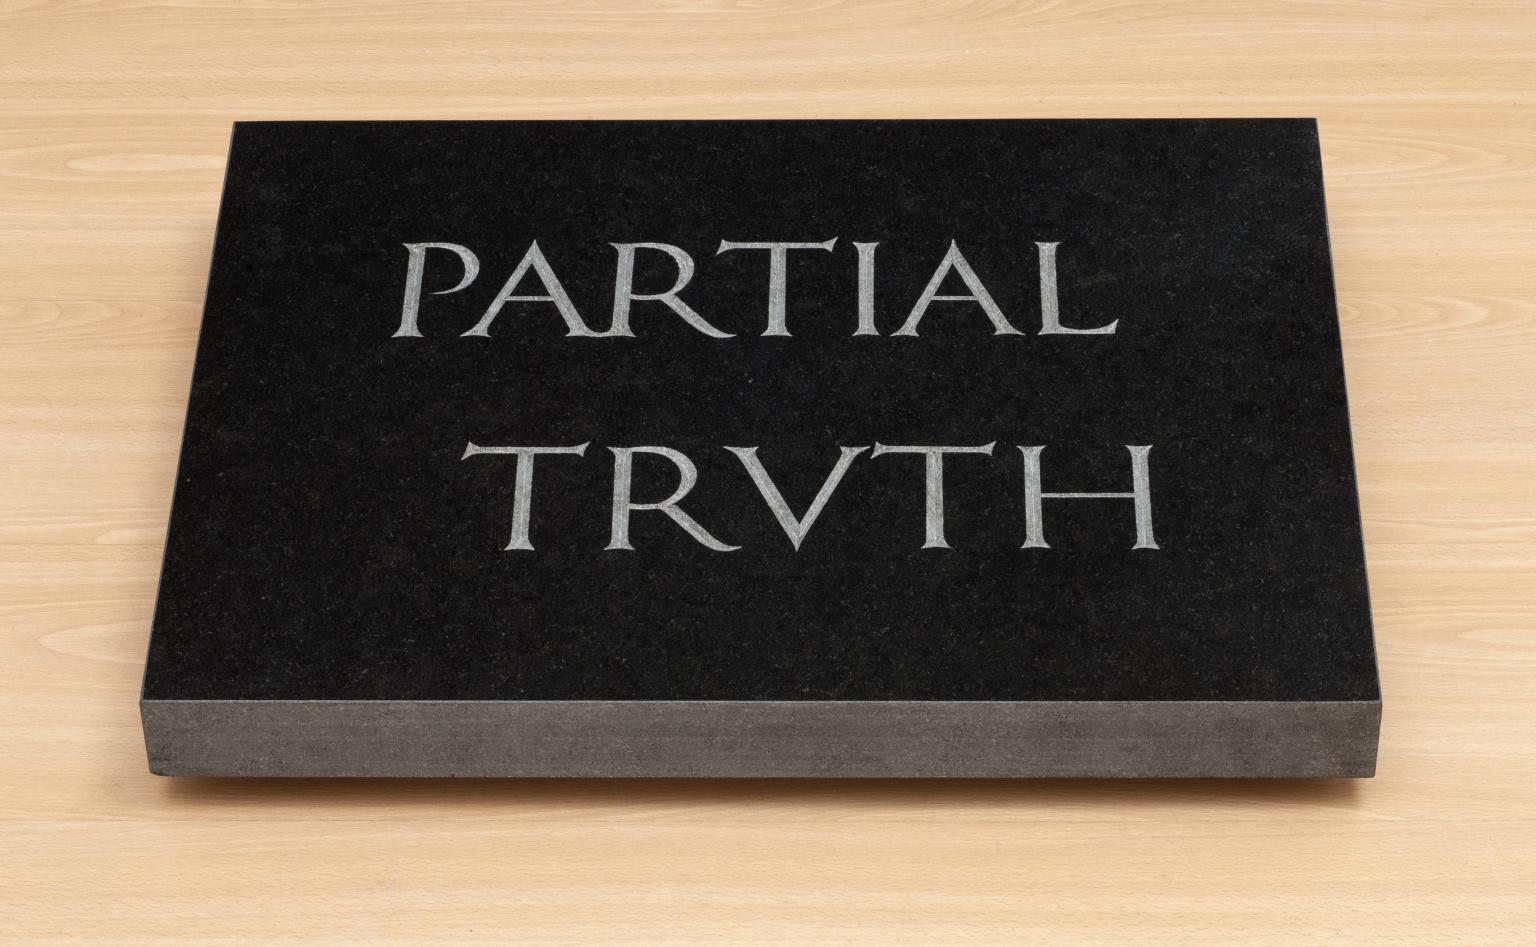 A partial truth is a fact that is true but is a fragment of the whole truth. Graphic